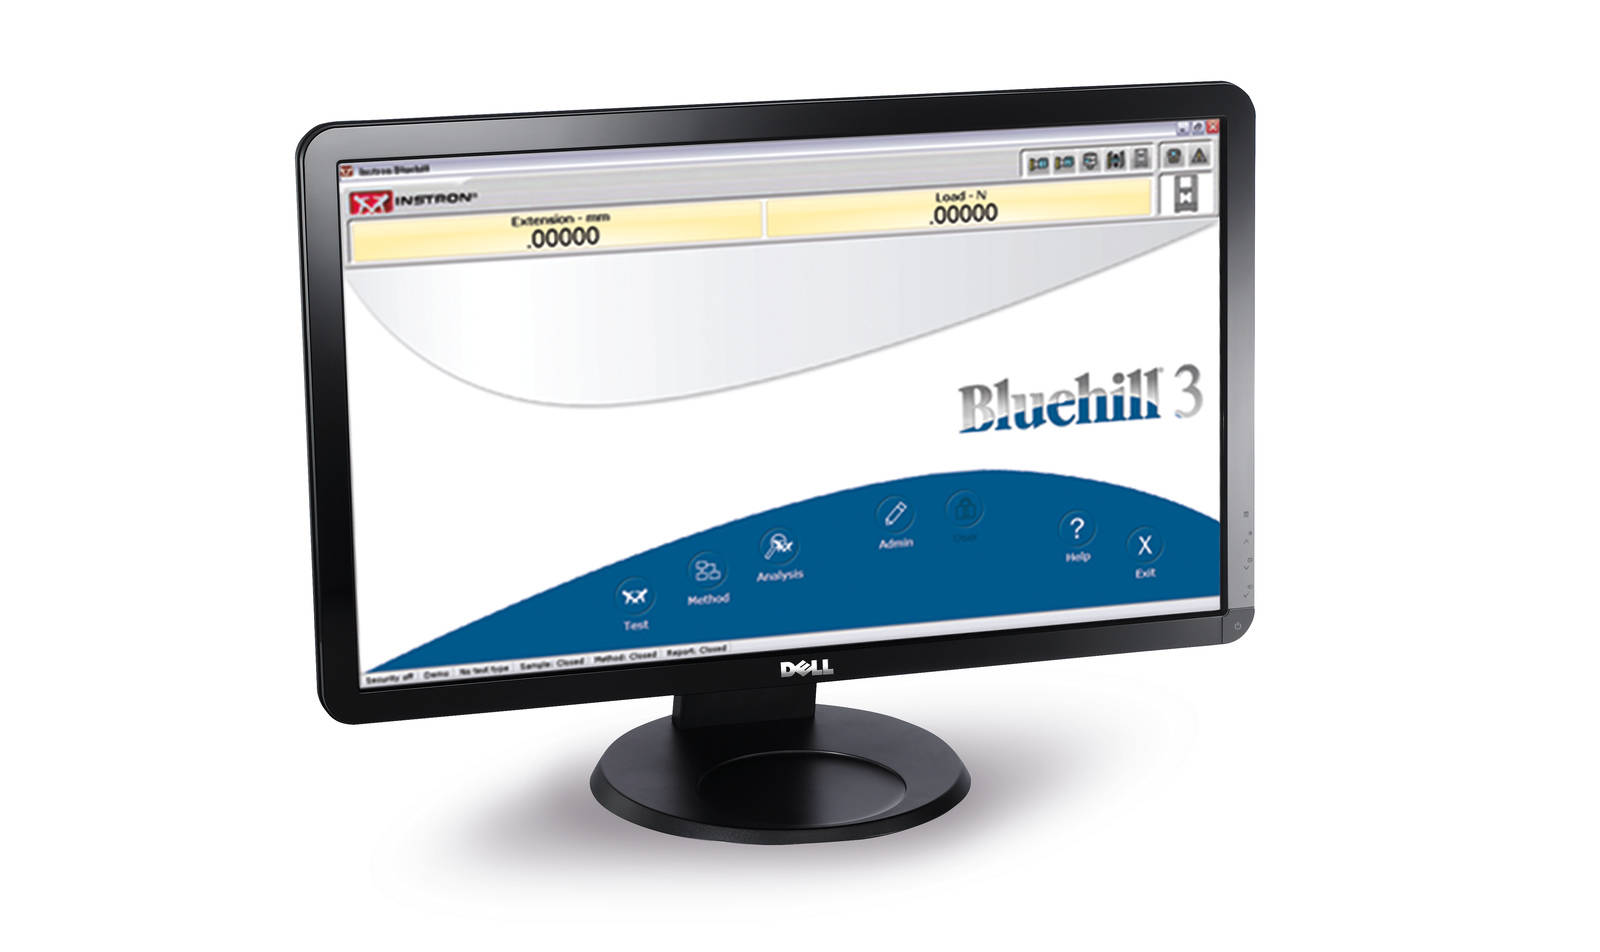 PC Display with Bluehill 3